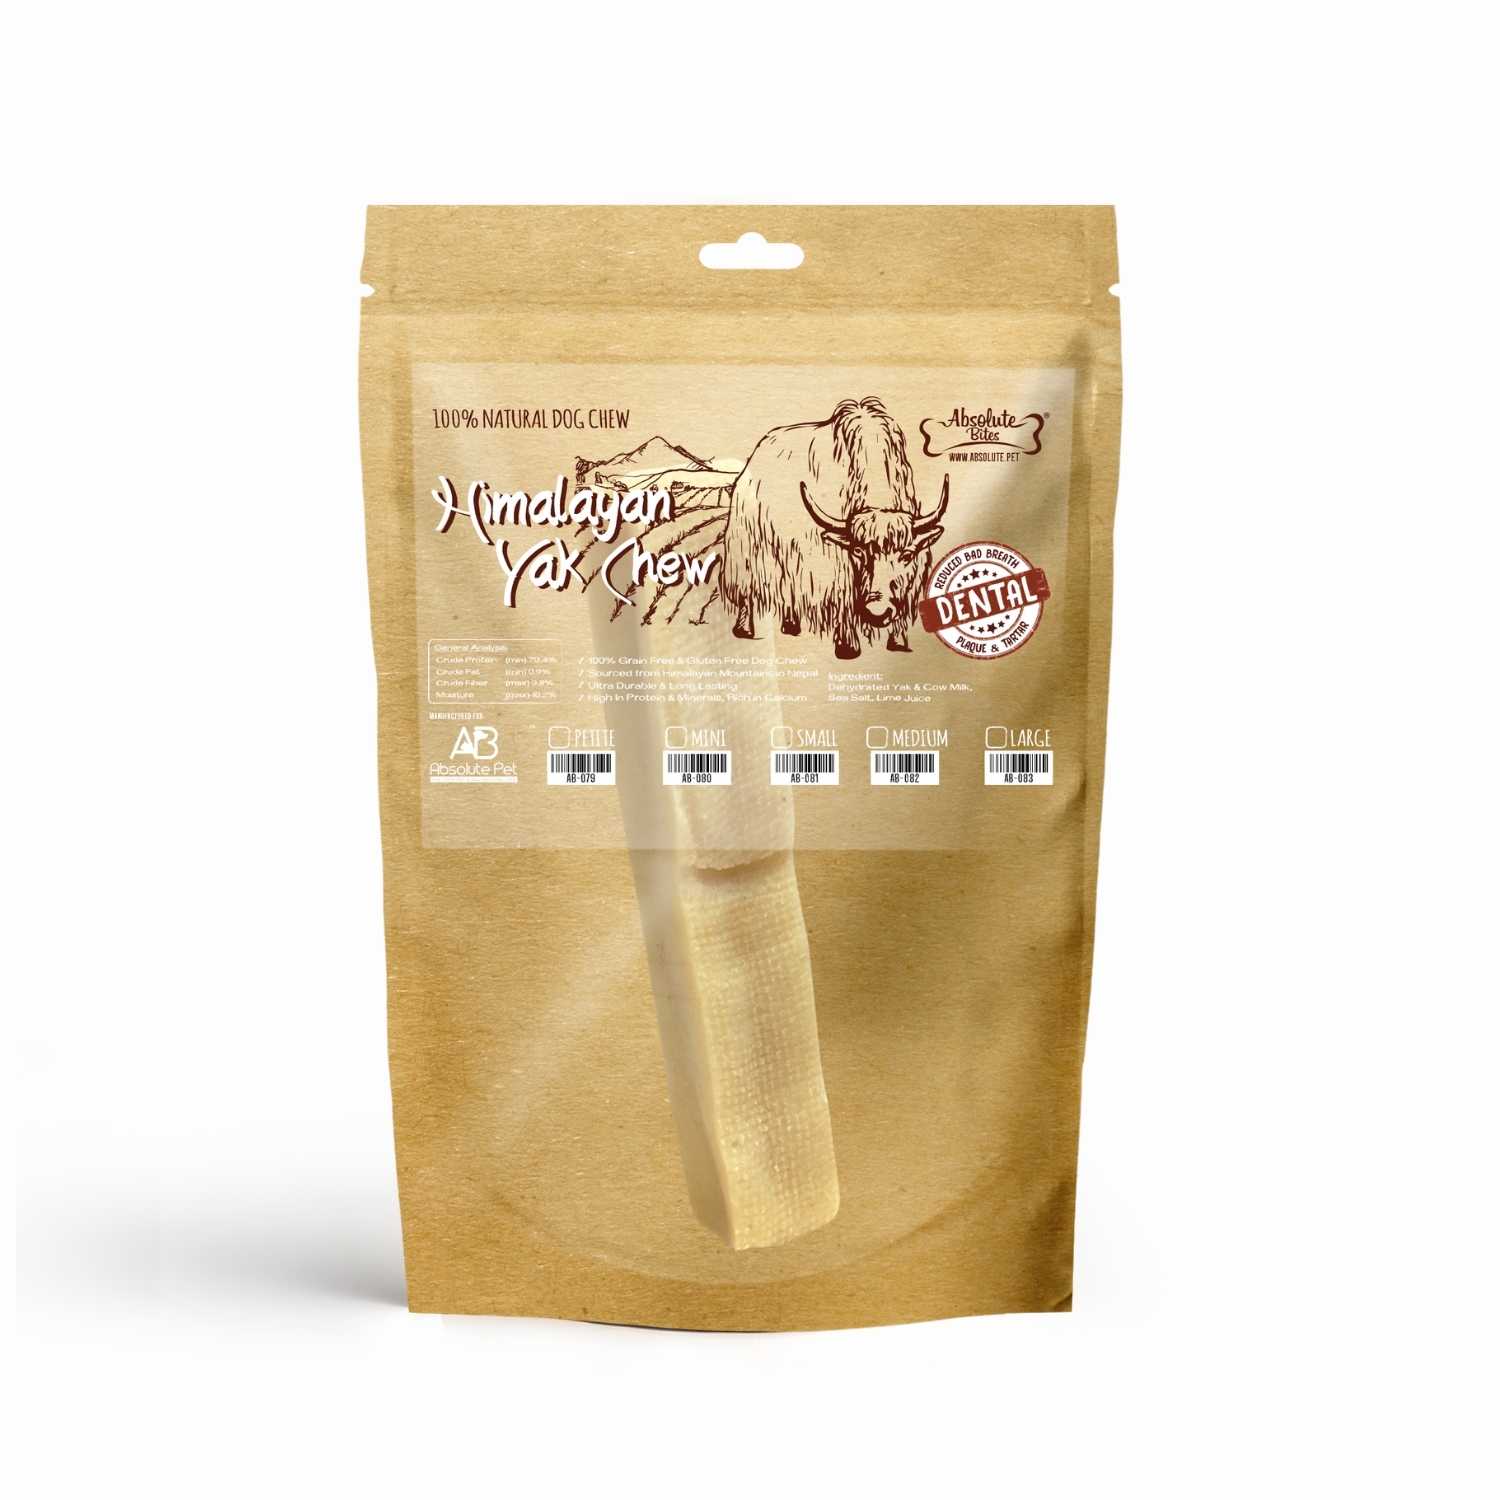 Absolute Bites - Himalayan Yak Chew for Dogs (5 Sizes)